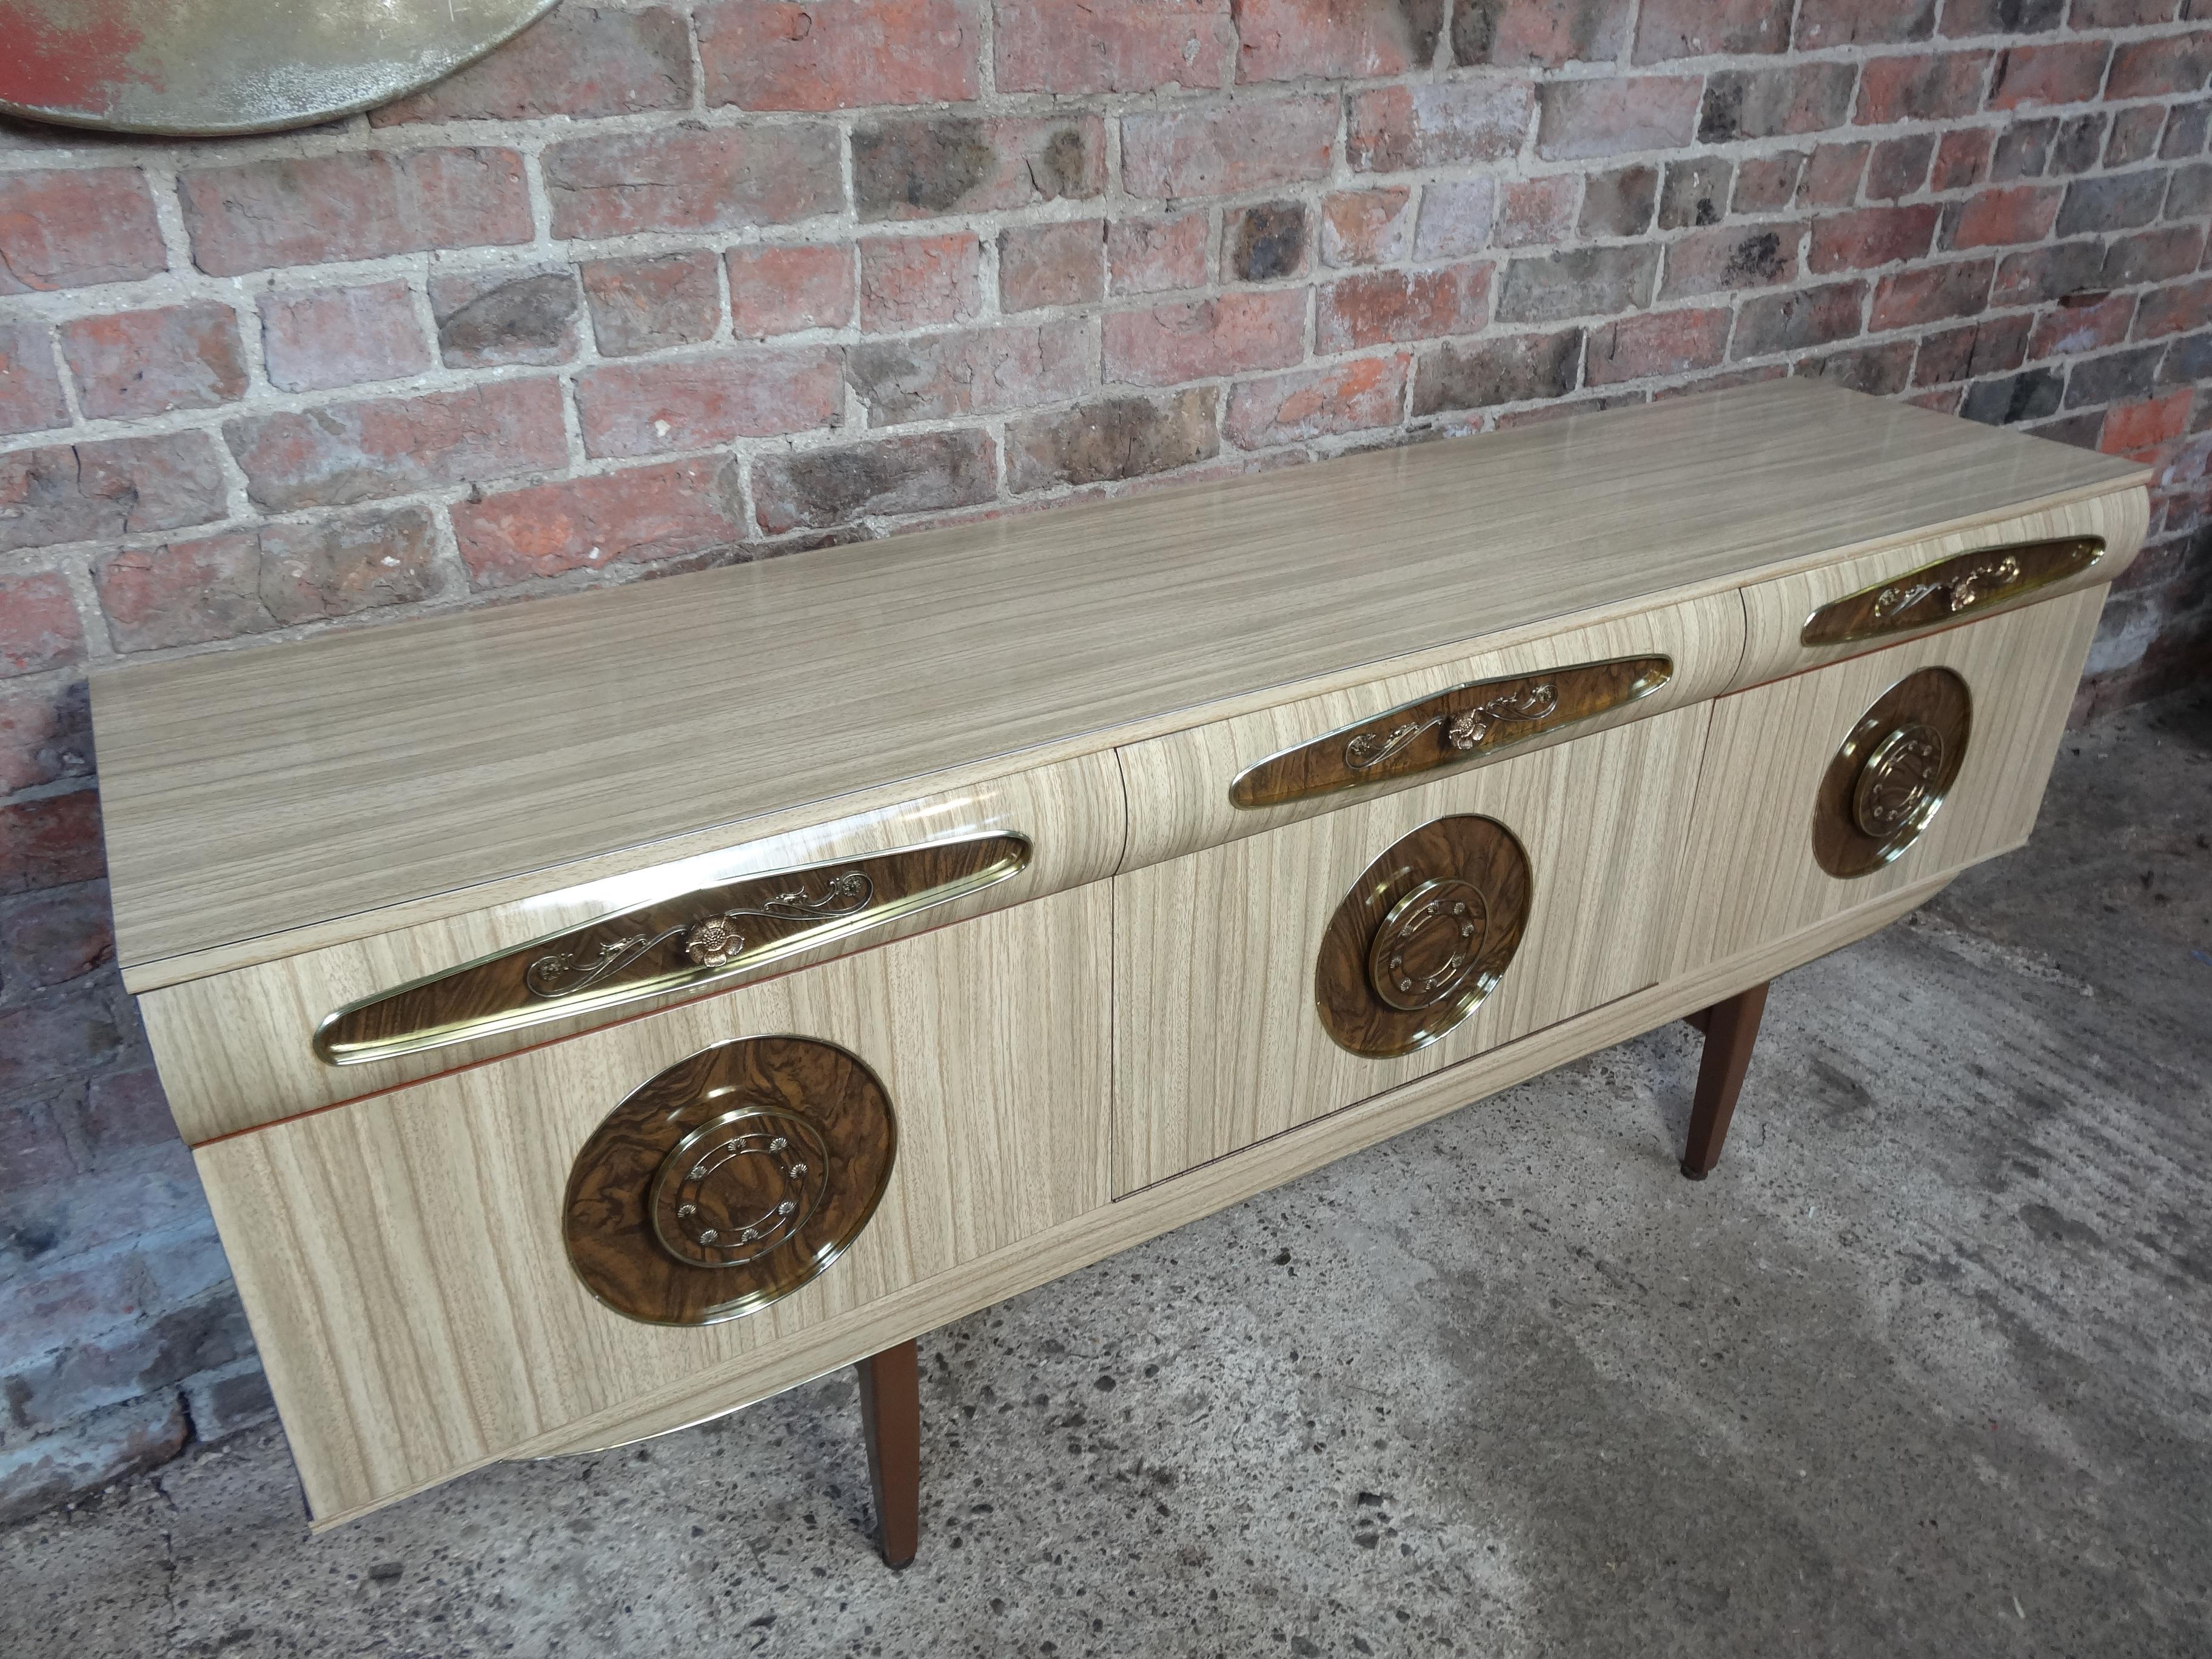 Teak Sought after Vintage Retro Italian Sideboard with Brass Handles from 1950s For Sale